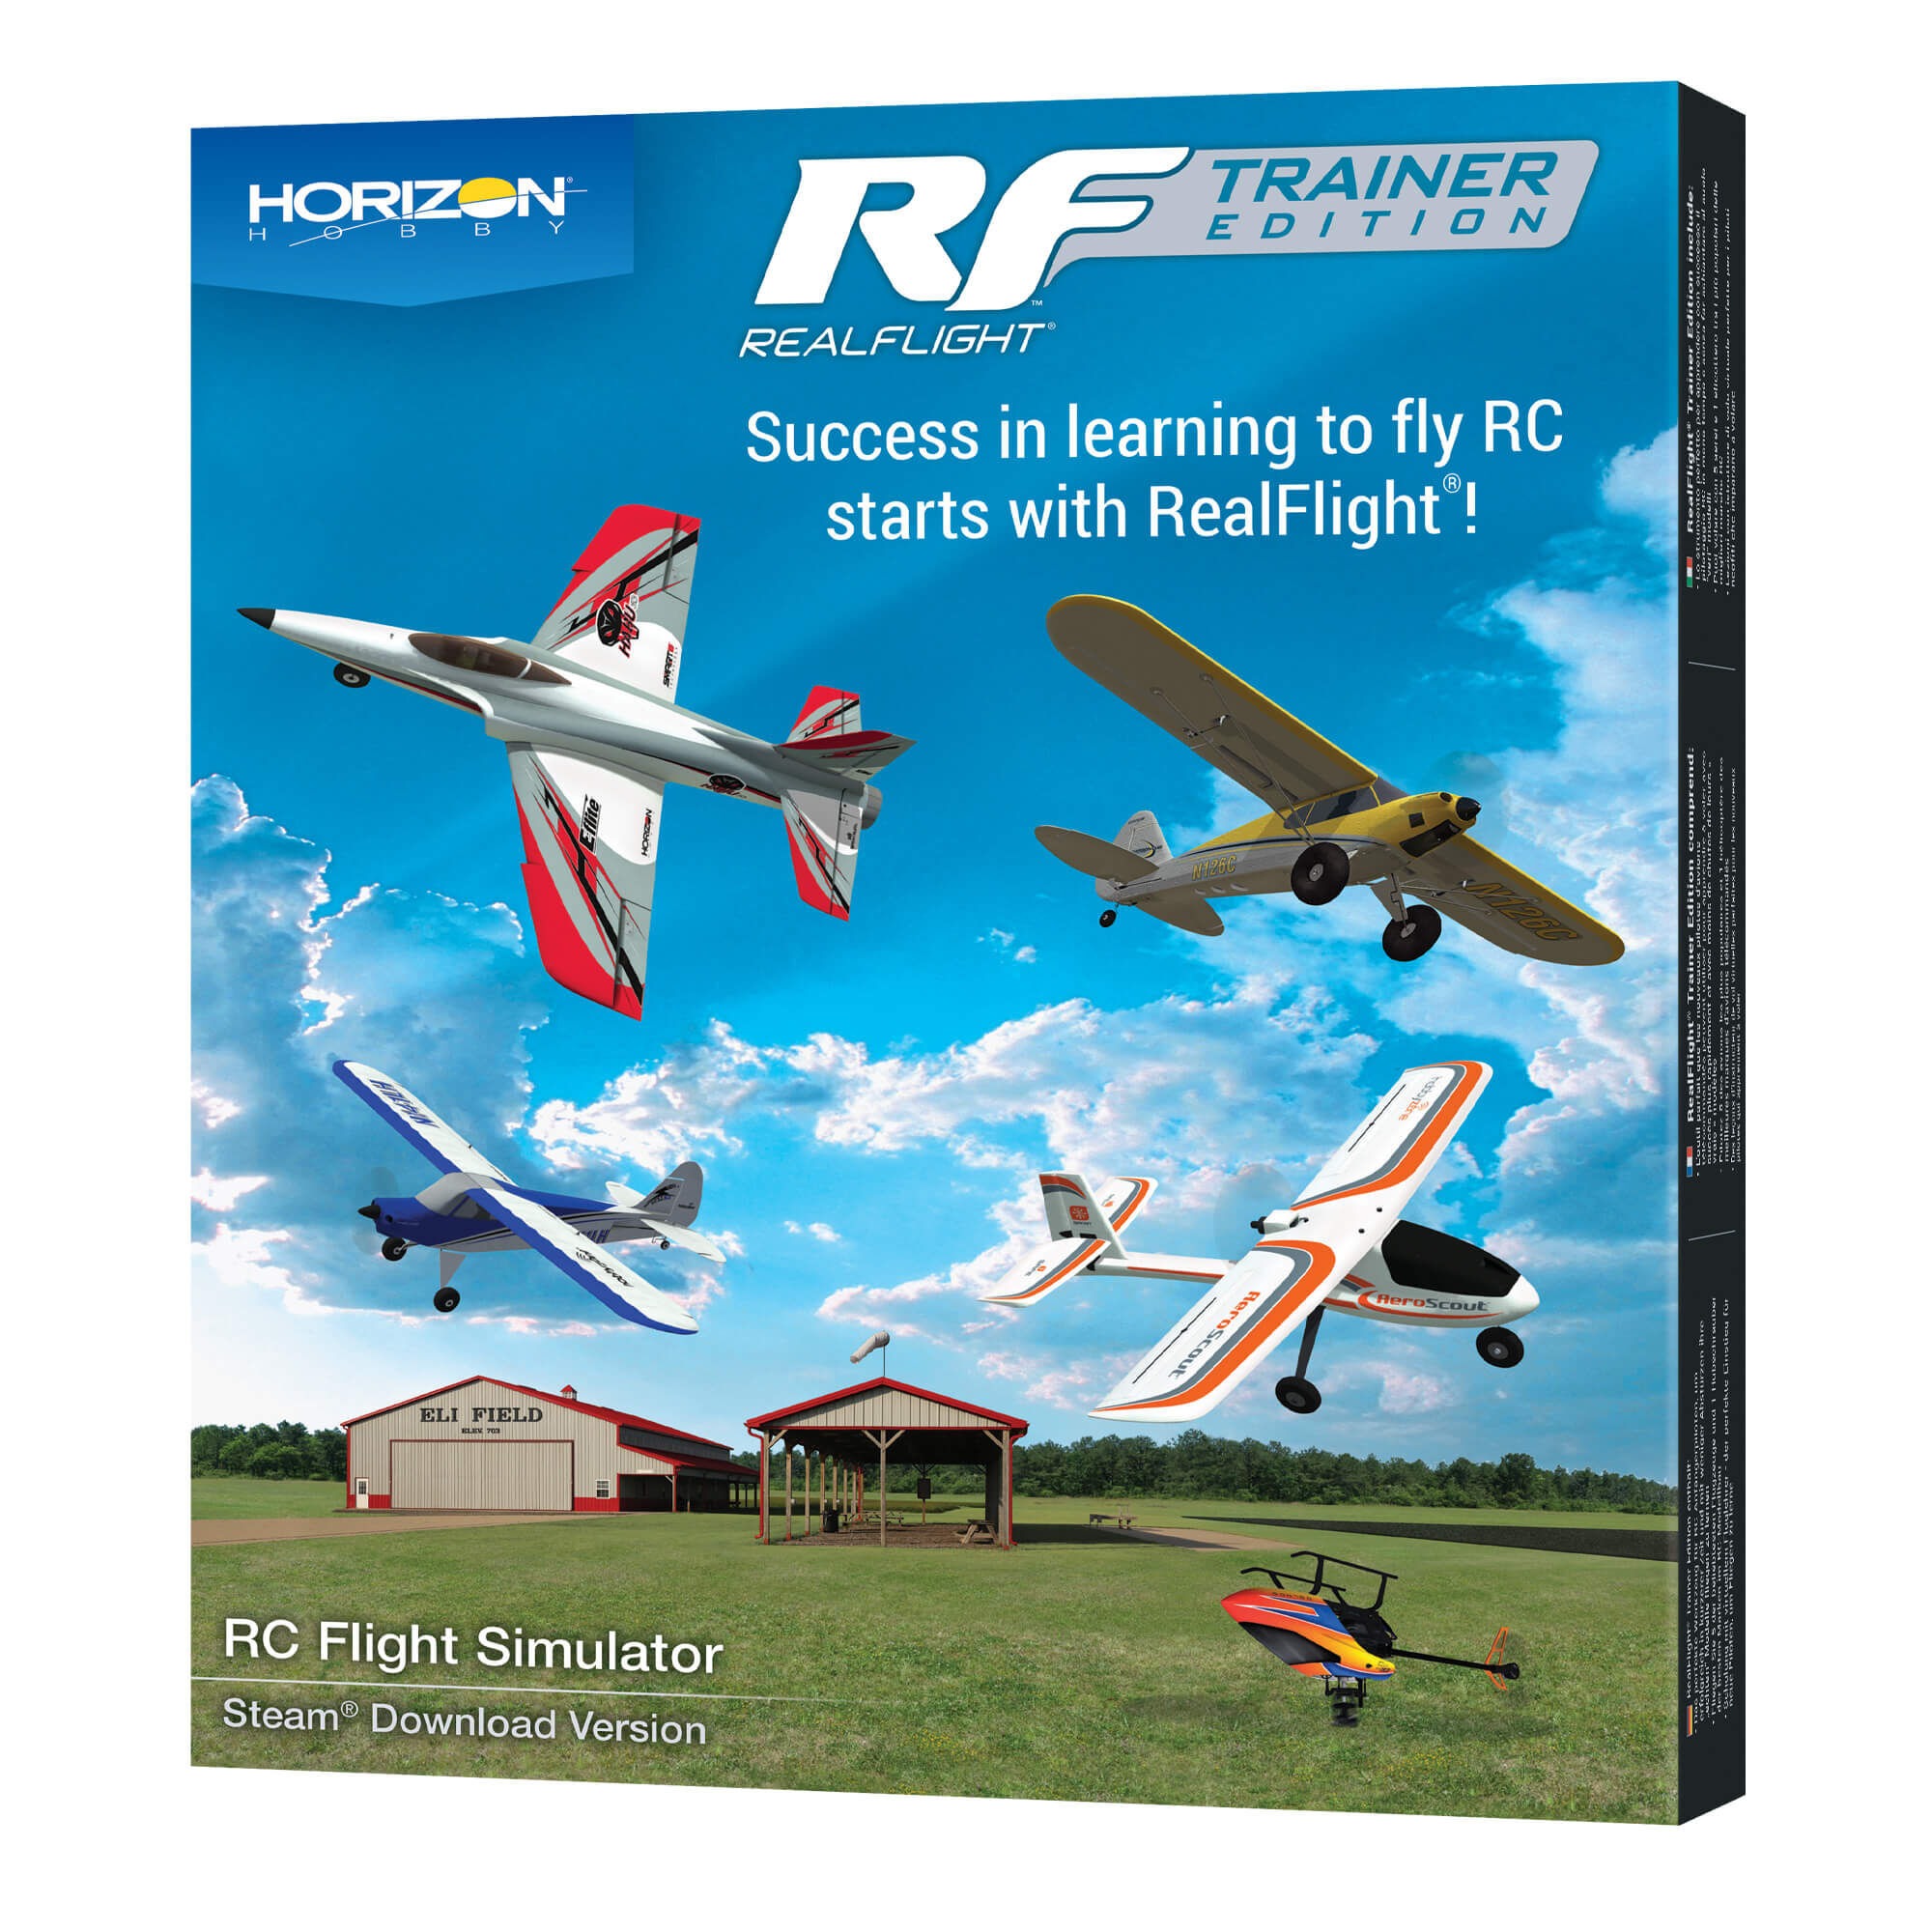 how many computers can i install realflight 7 on?